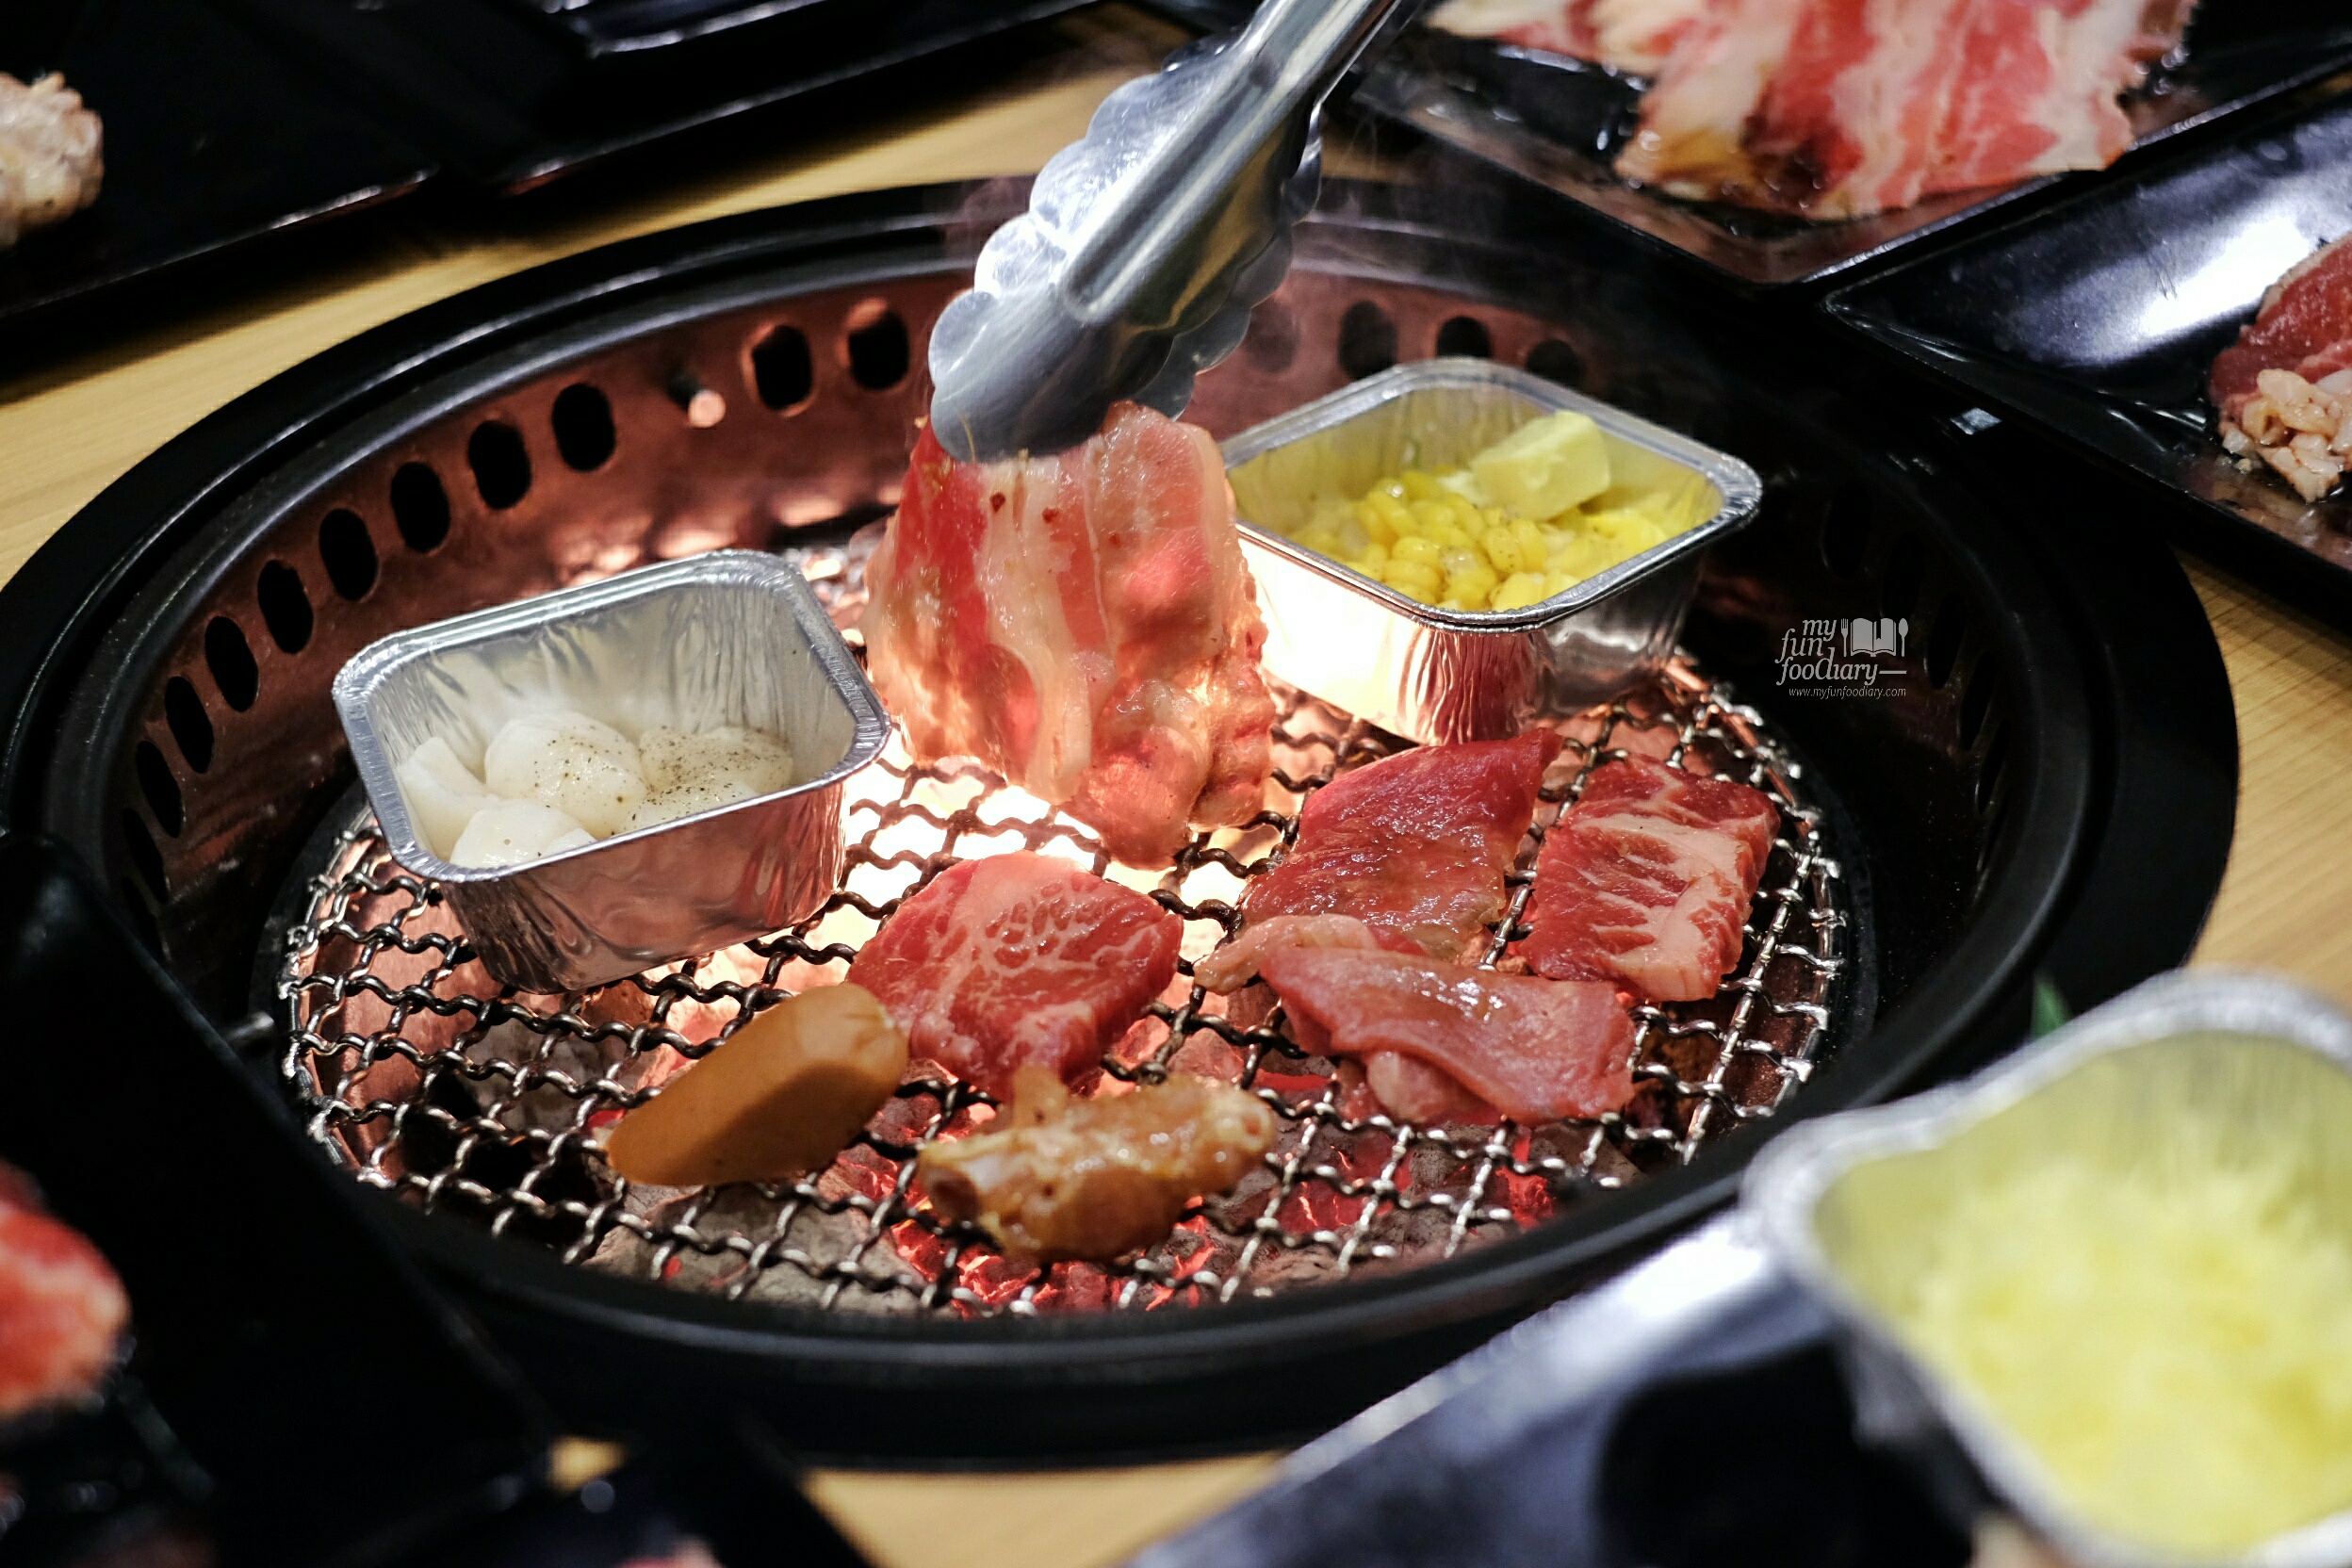 Non Stop Grilling the meat at Gyukaku by Myfunfoodiary